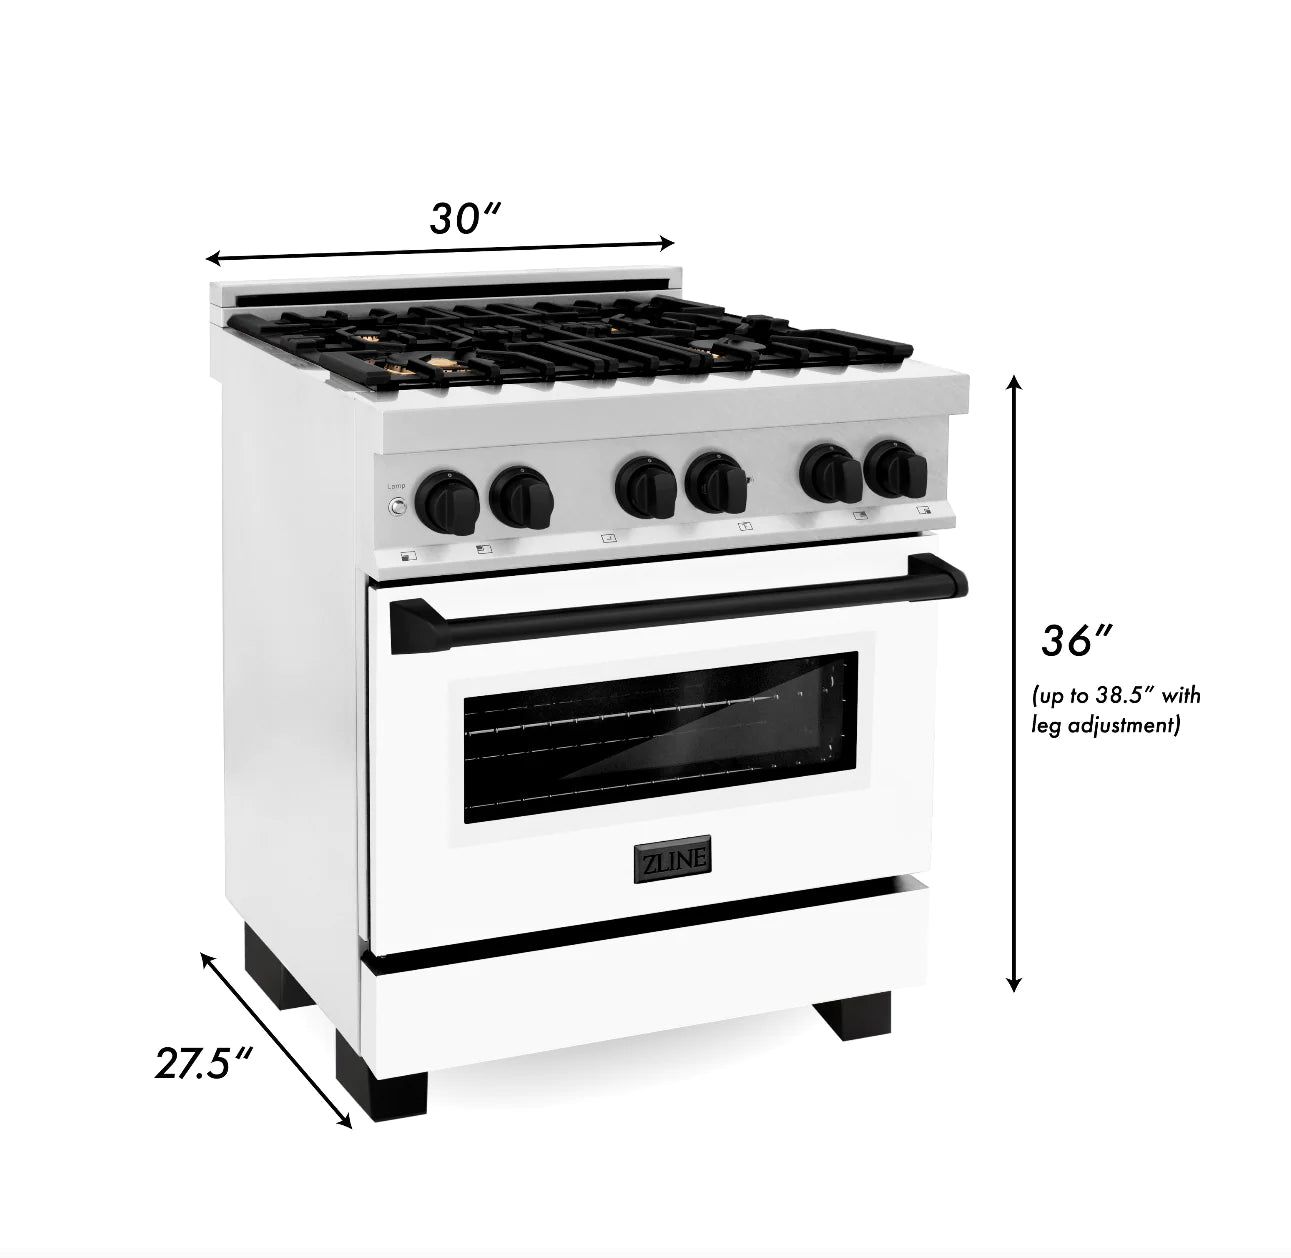 ZLINE Autograph Edition 30 in. Dual Fuel Range in DuraSnow Steel with White Door and Black Accents (RASZ-WM-30-MB)